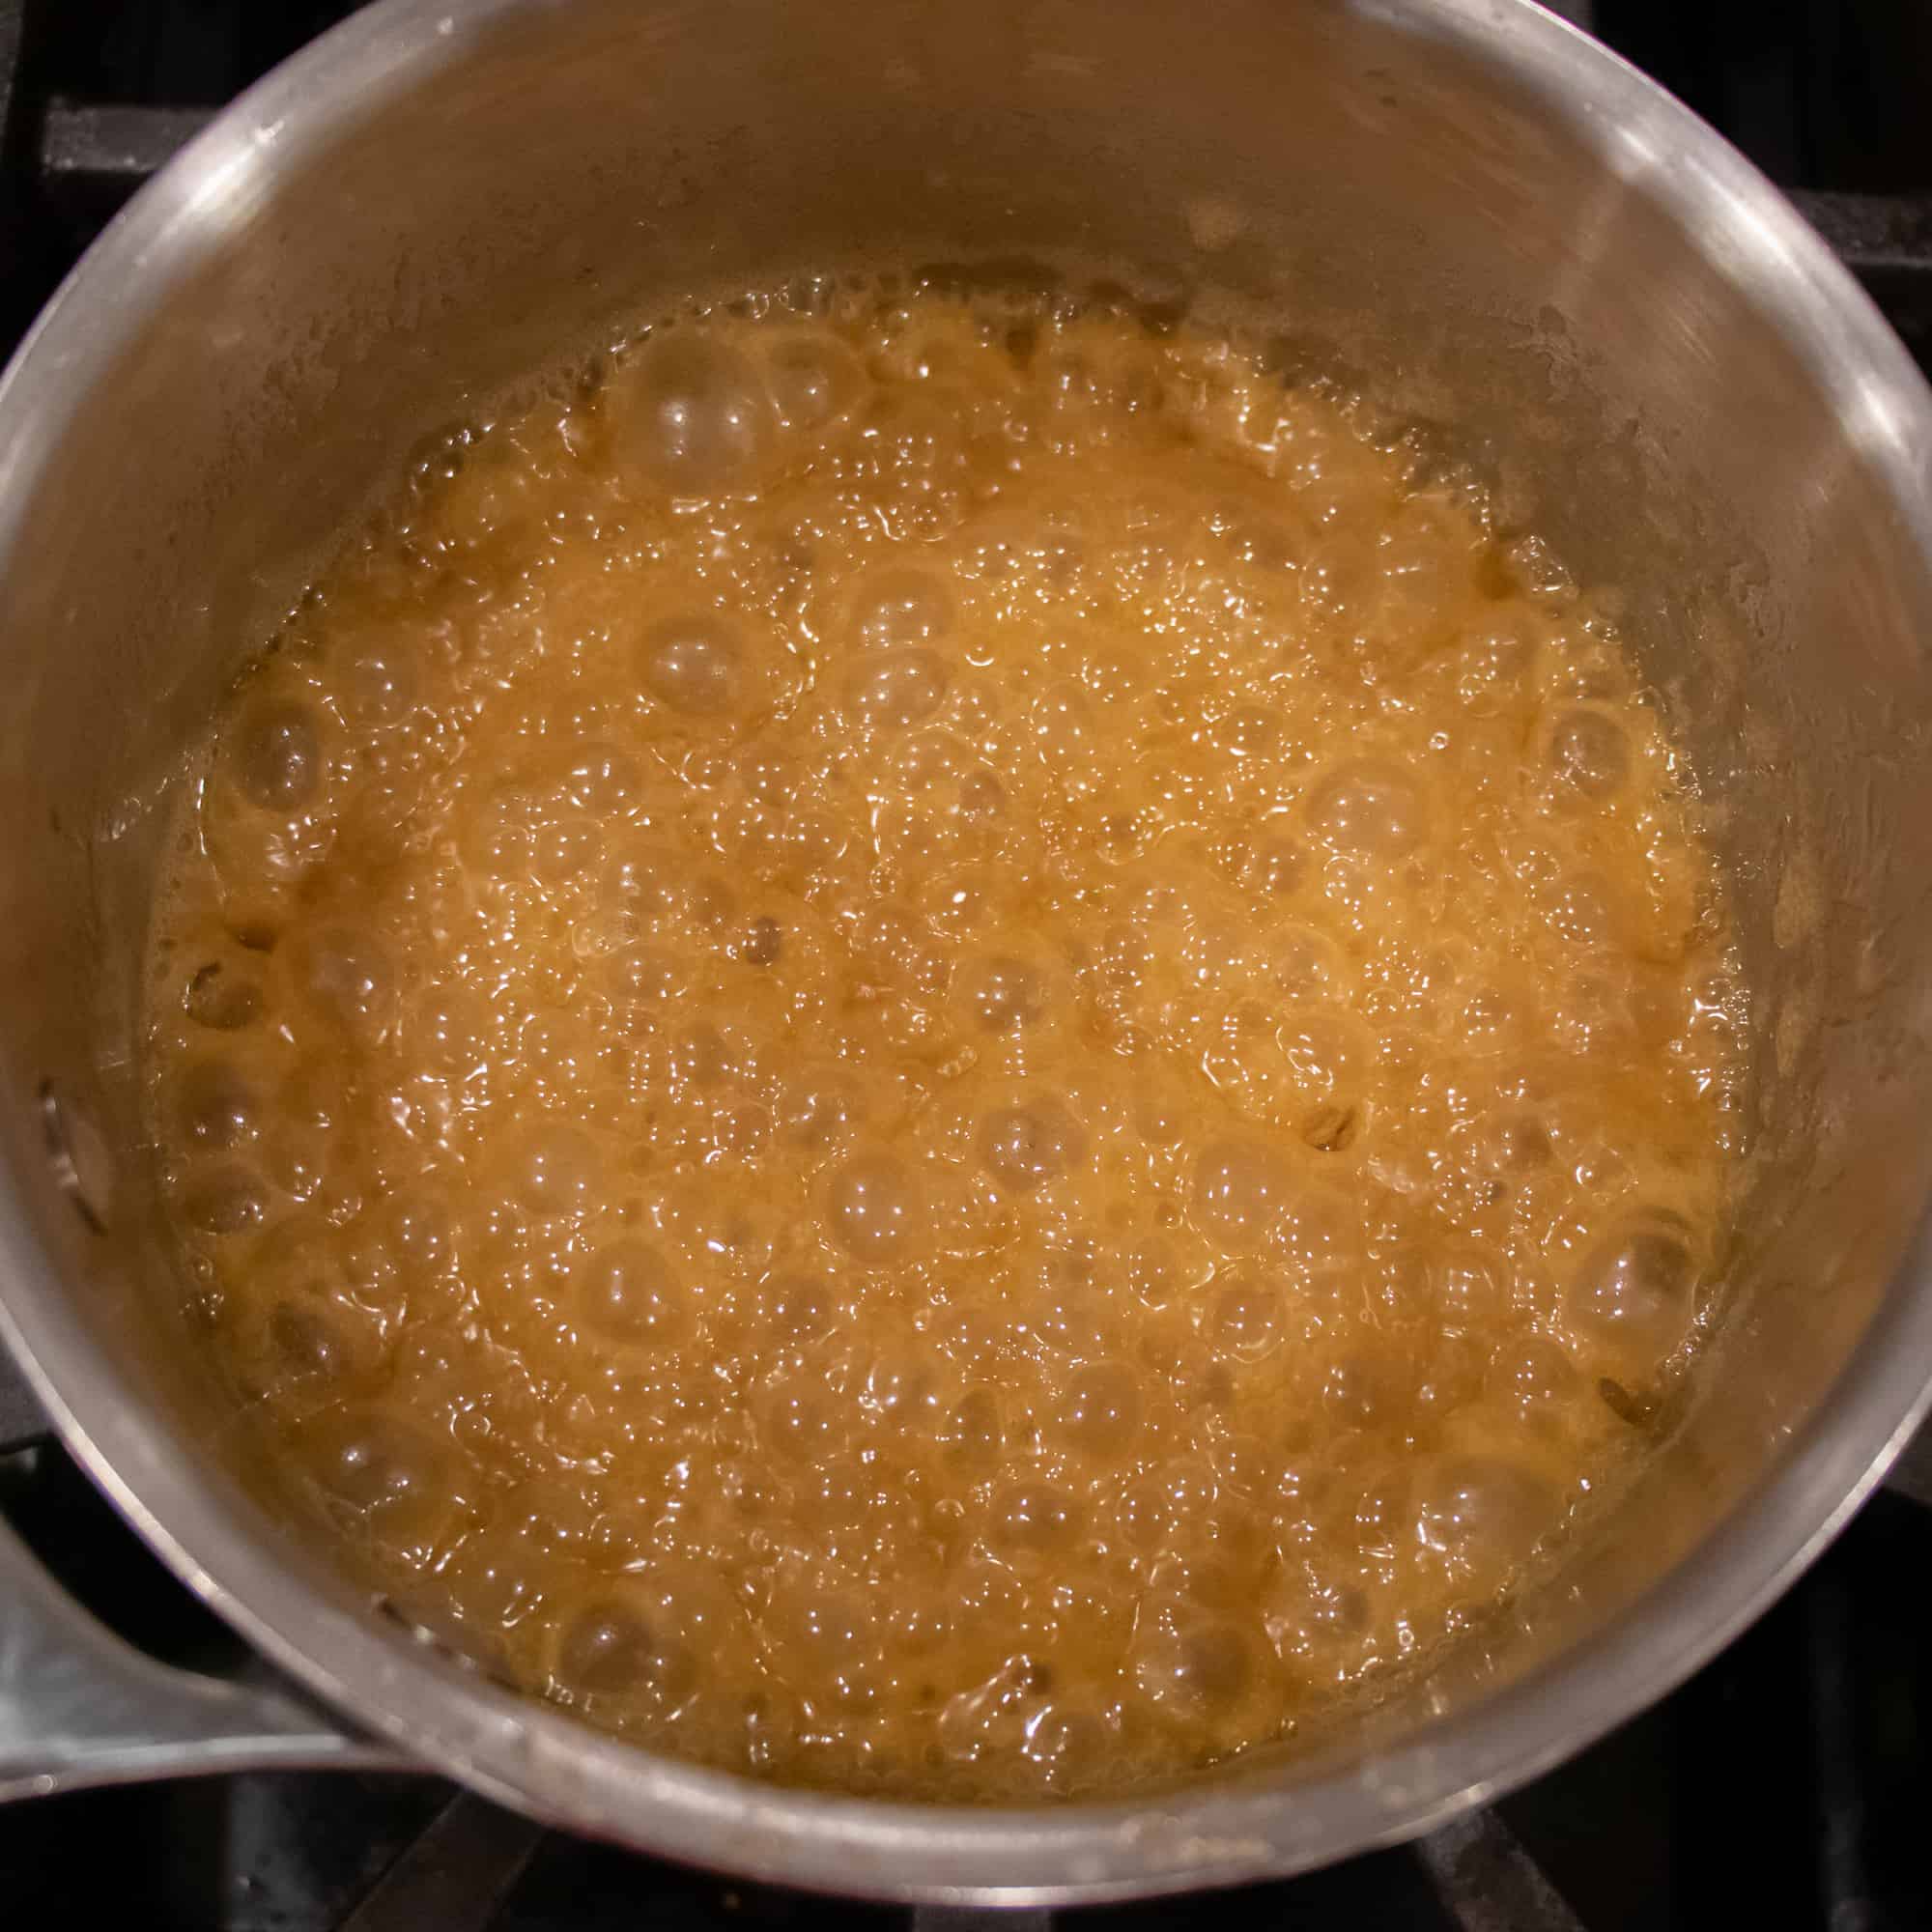 Let the caramel mixture bubble for 2 minutes.